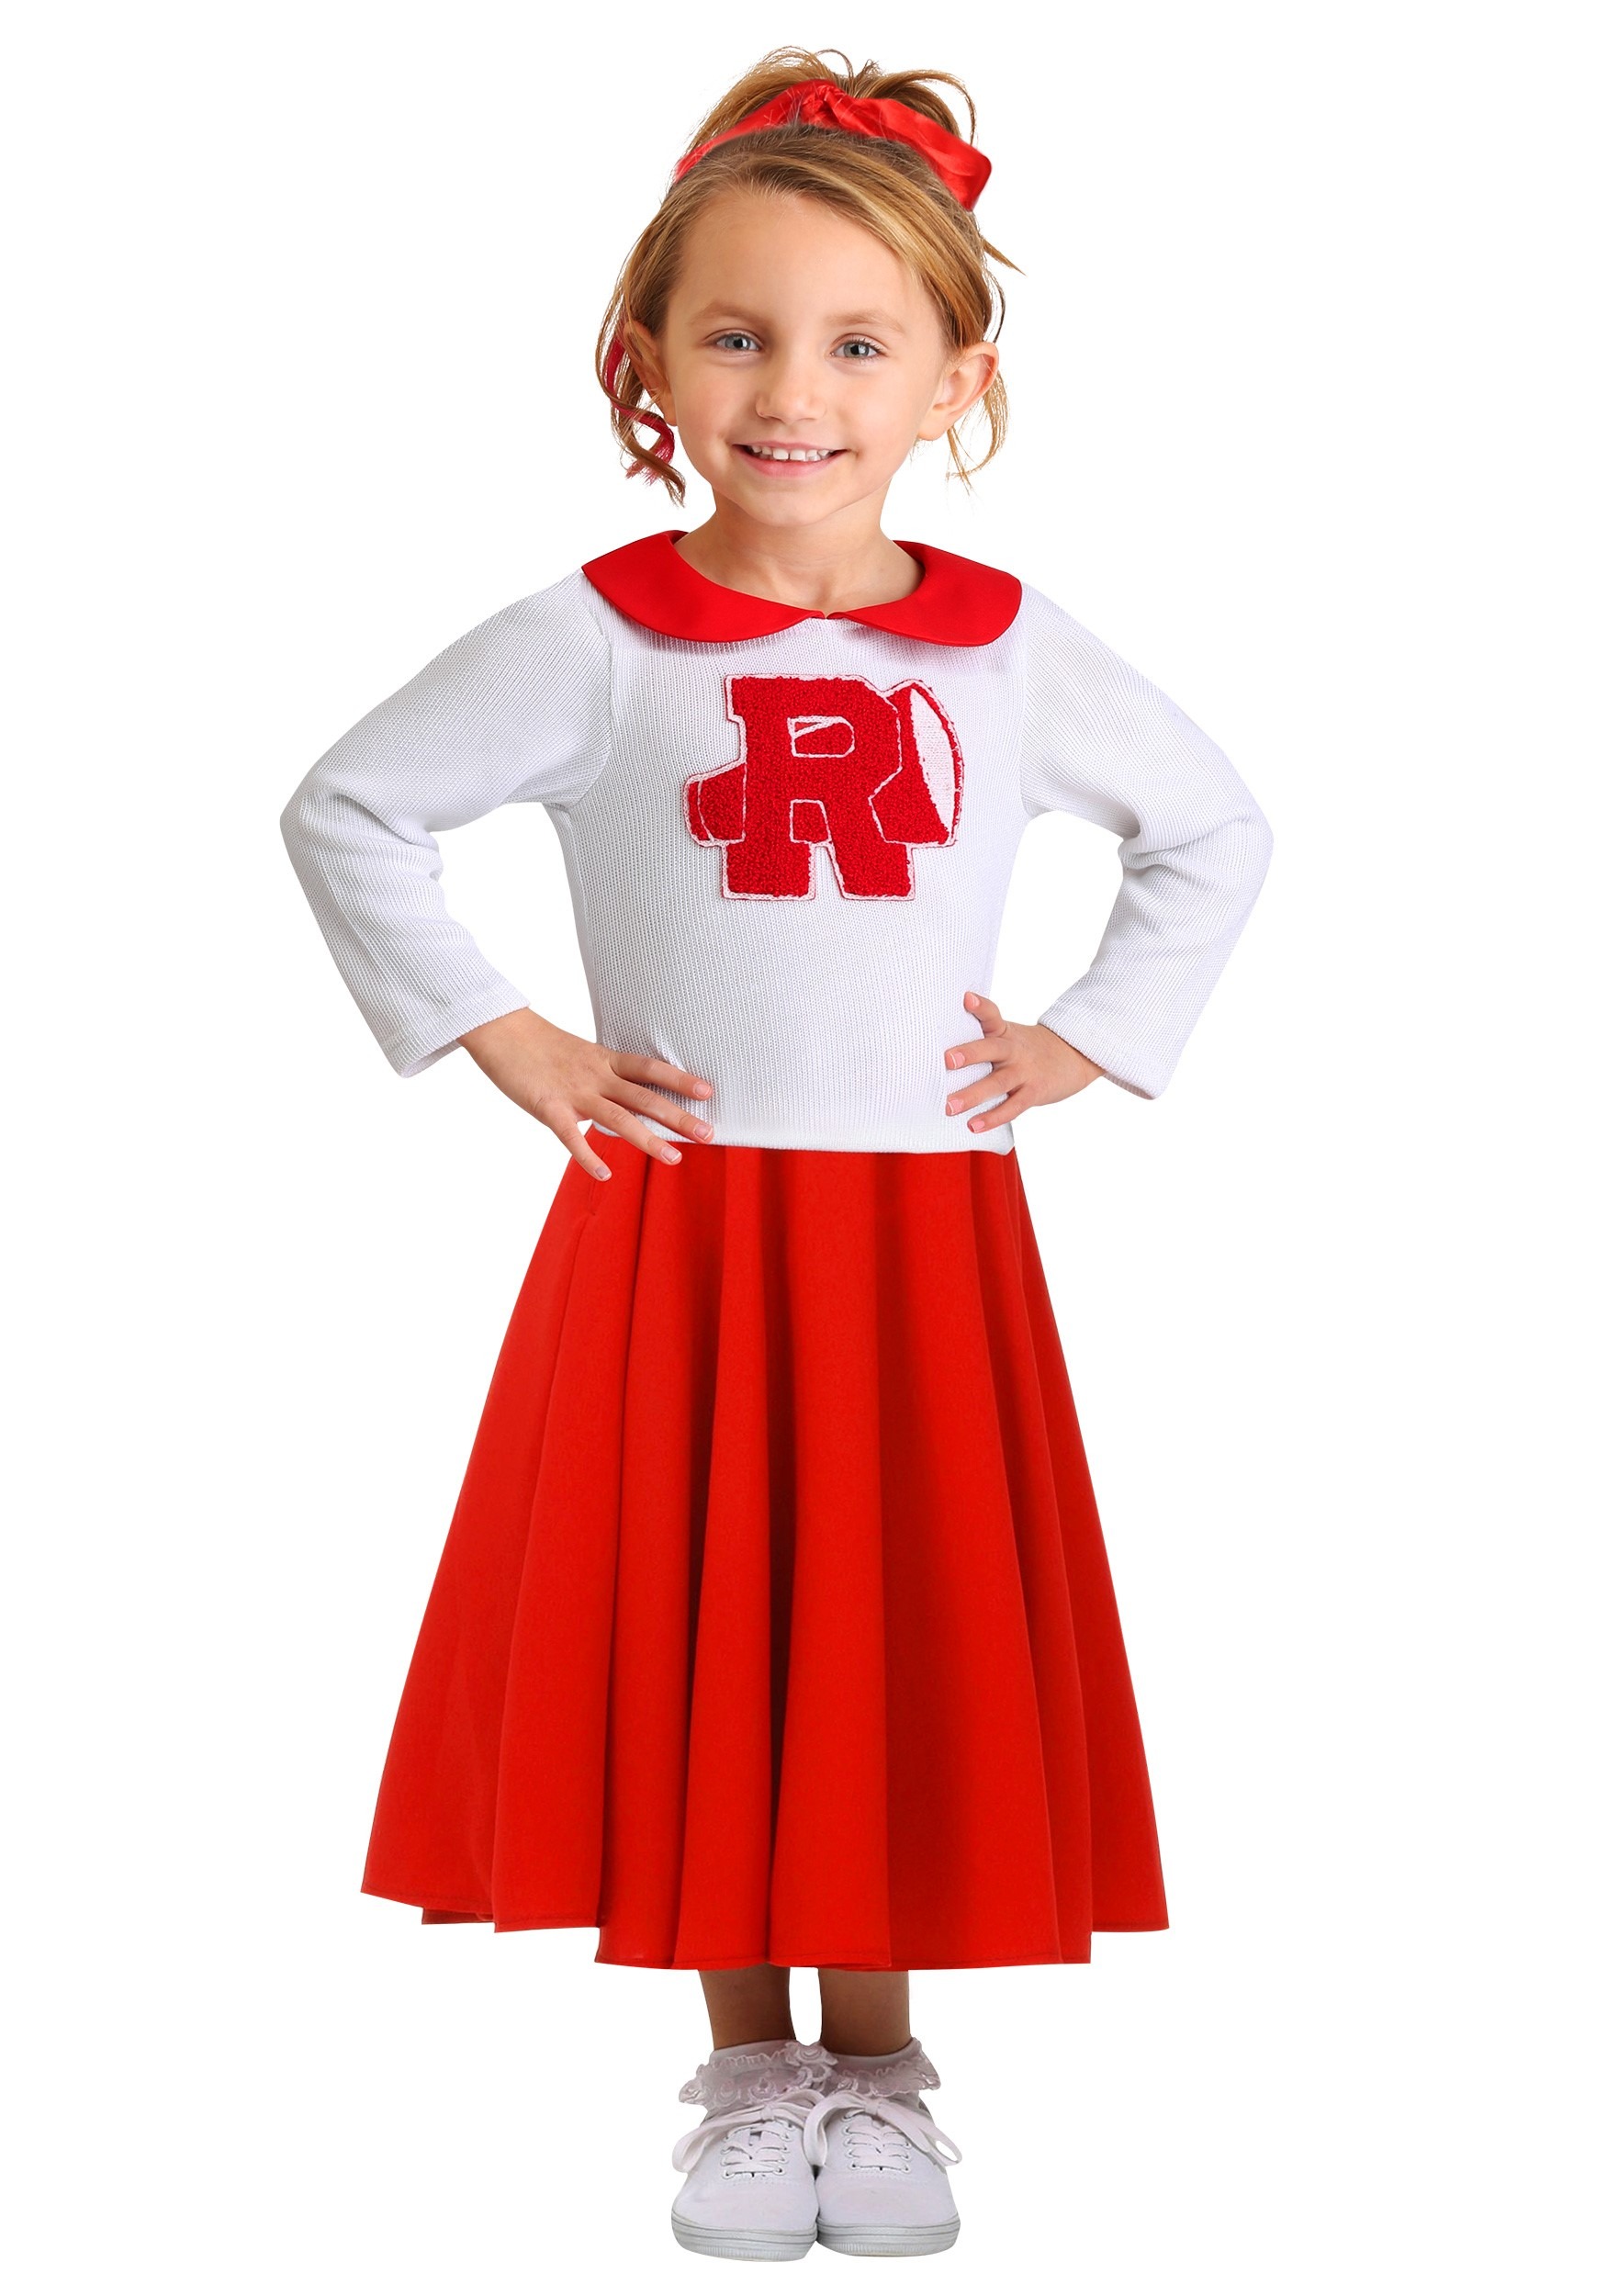 Grease Rydell High Toddler’s Cheerleader Costume